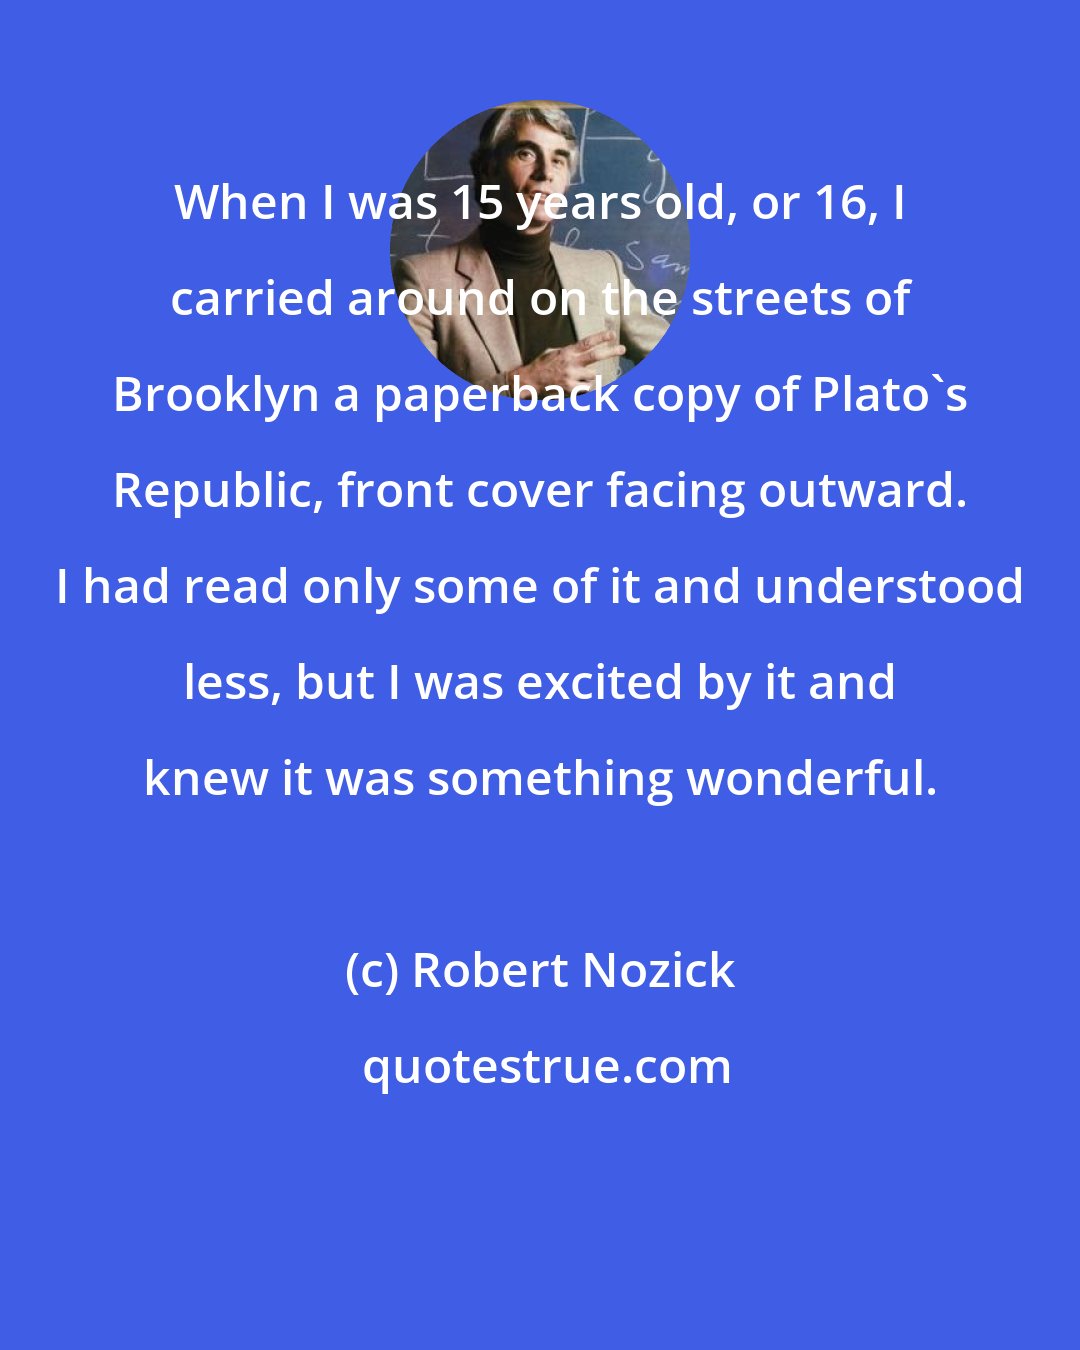 Robert Nozick: When I was 15 years old, or 16, I carried around on the streets of Brooklyn a paperback copy of Plato's Republic, front cover facing outward. I had read only some of it and understood less, but I was excited by it and knew it was something wonderful.